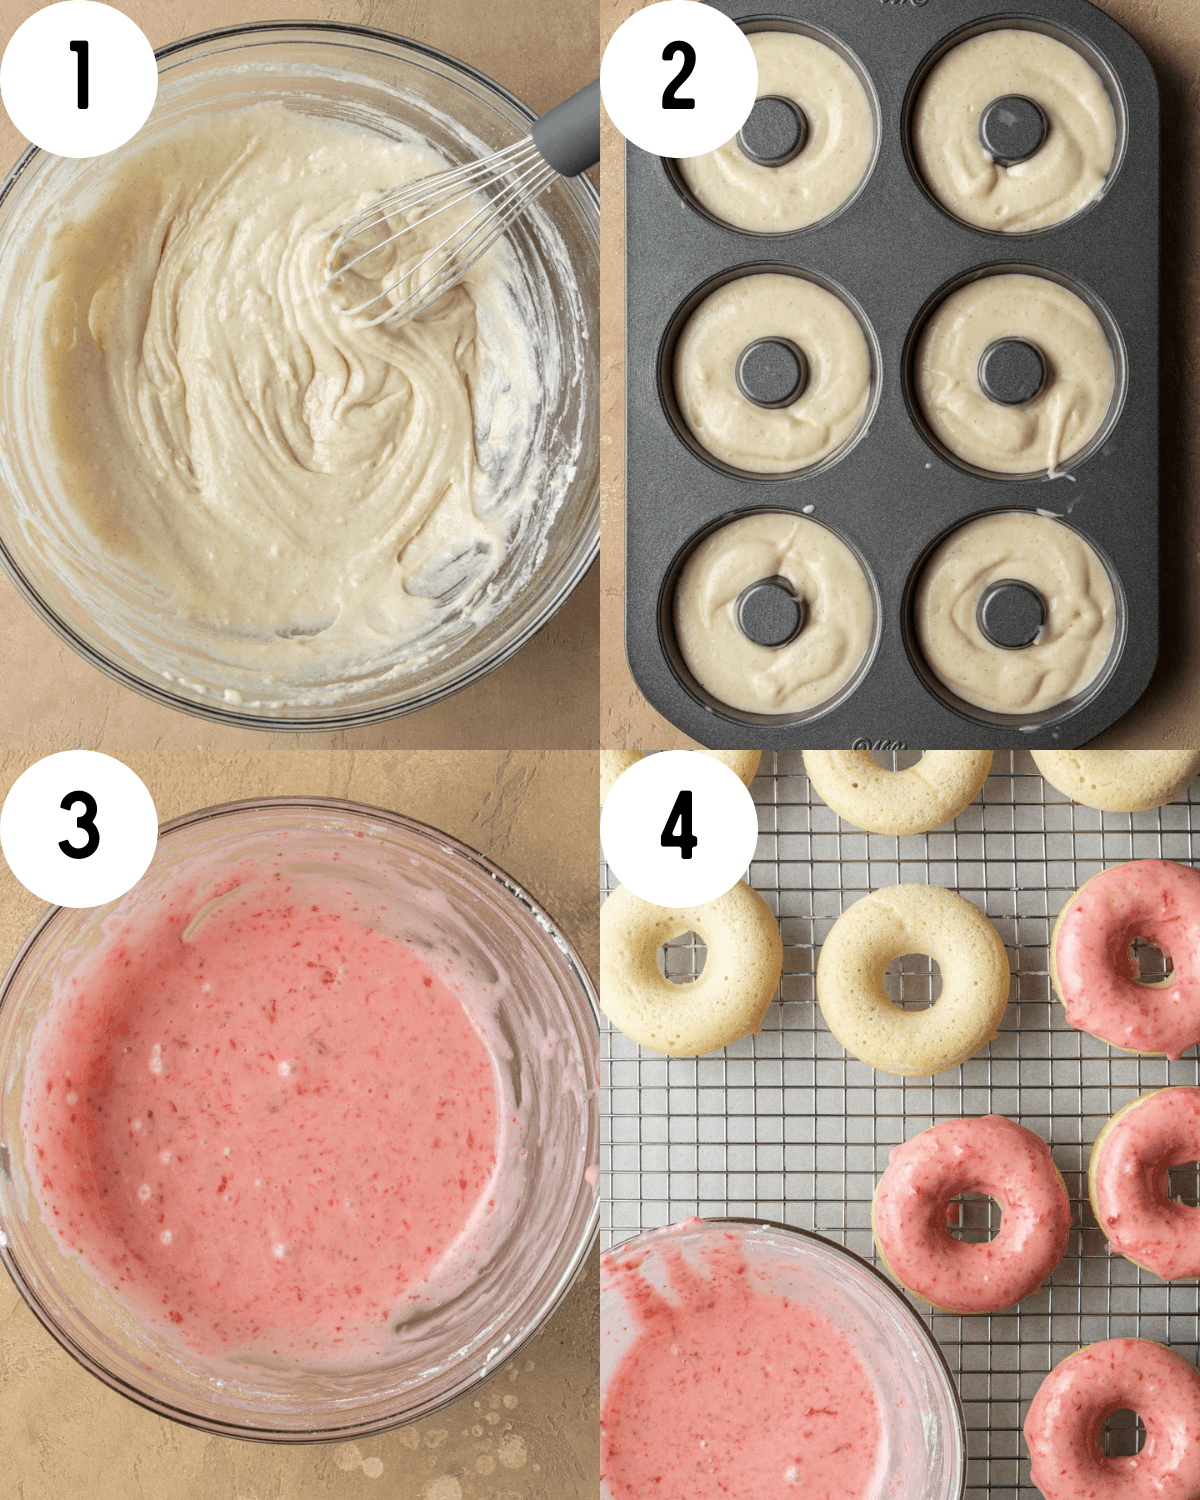 How to make strawberry glazed donuts. 1. Wet ingredients in glass mixing bowl with whisk. 2. Batter placed in donut baking pan. 3. Strawberry glaze in glass mixing bowl. 4. Baked donuts sitting on cooling rack dipped in strawberry glaze. 